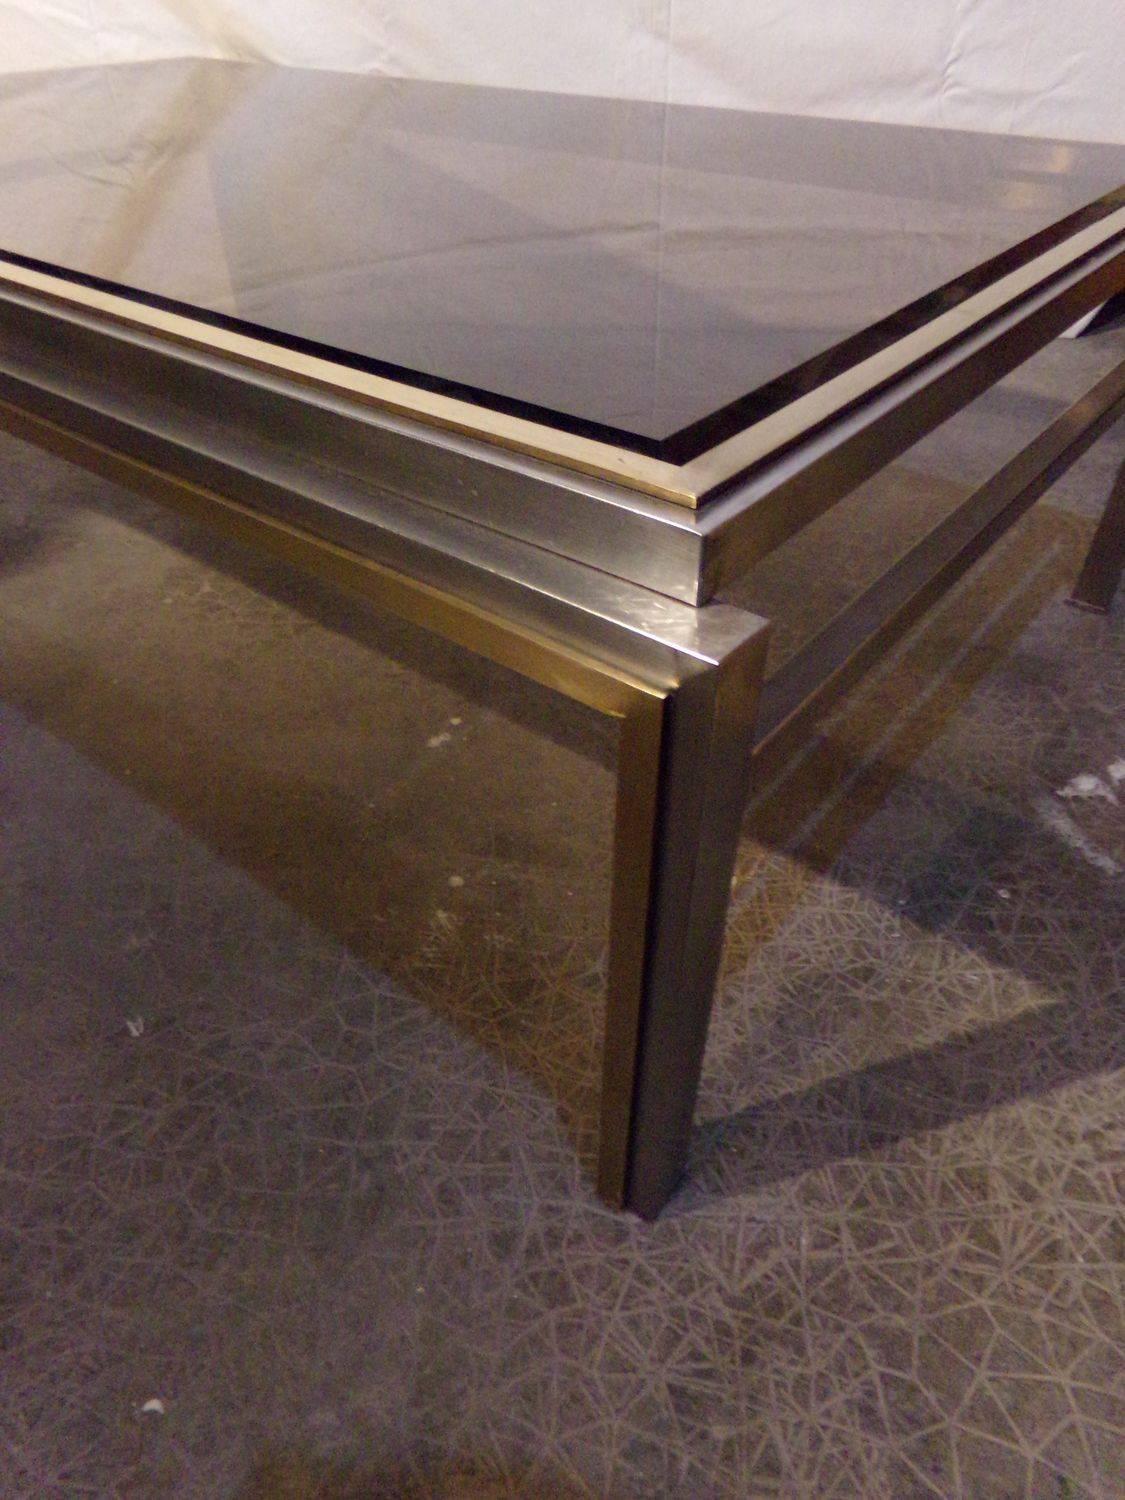 Large Willy Rizzo Coffee Table, Chrome and Gilded Metal, Smoked Glass, 1970s im Angebot 1